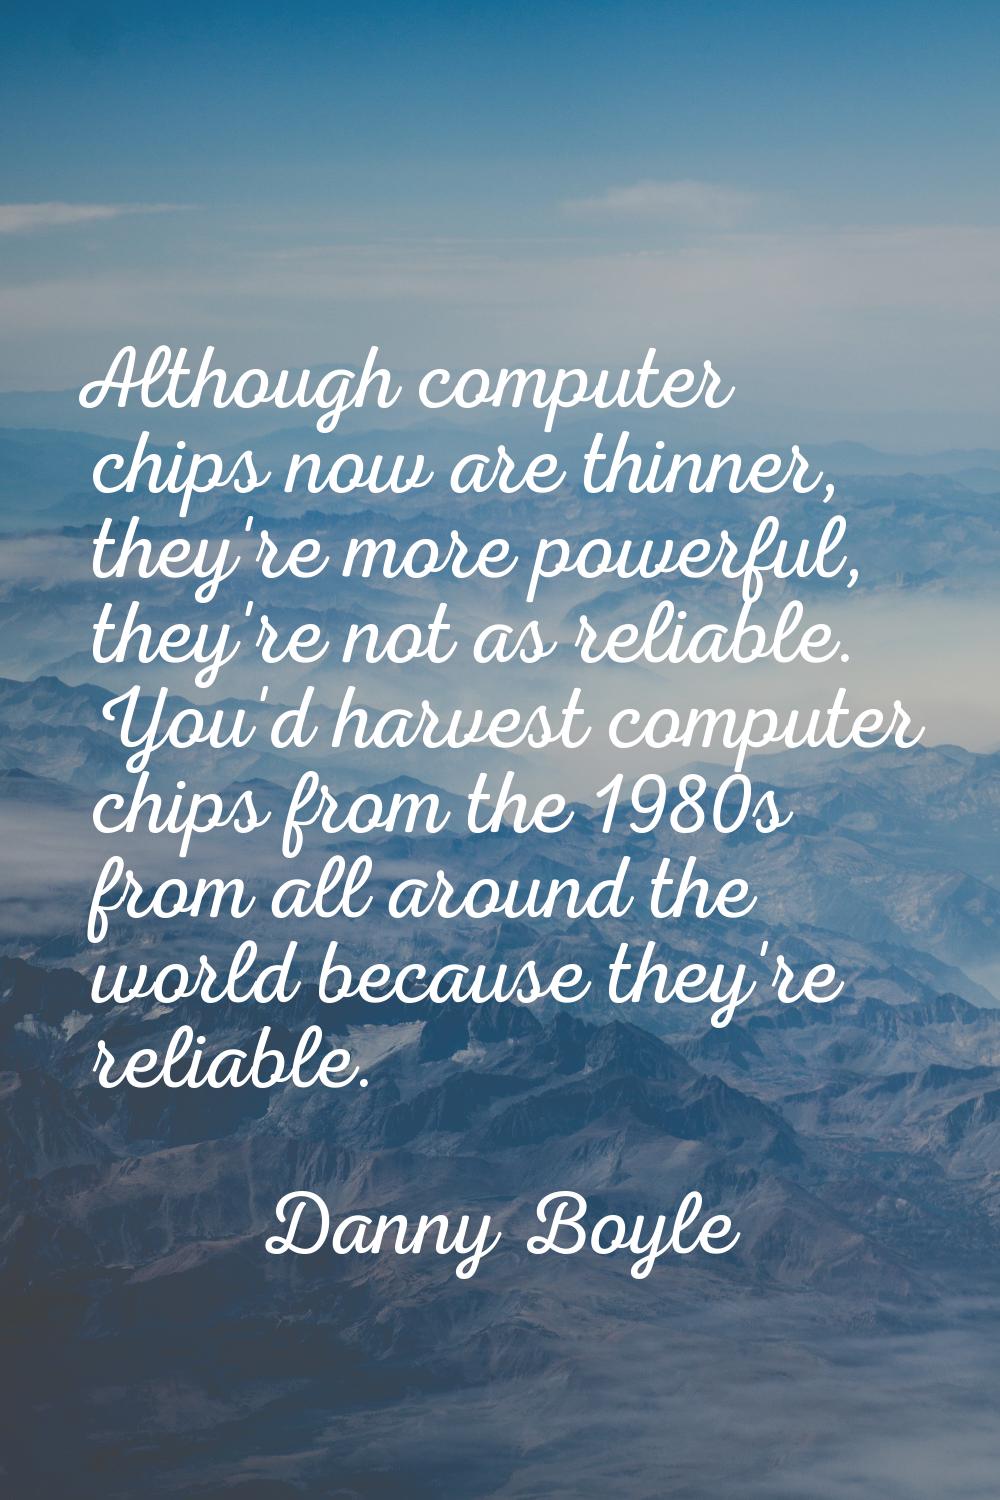 Although computer chips now are thinner, they're more powerful, they're not as reliable. You'd harv